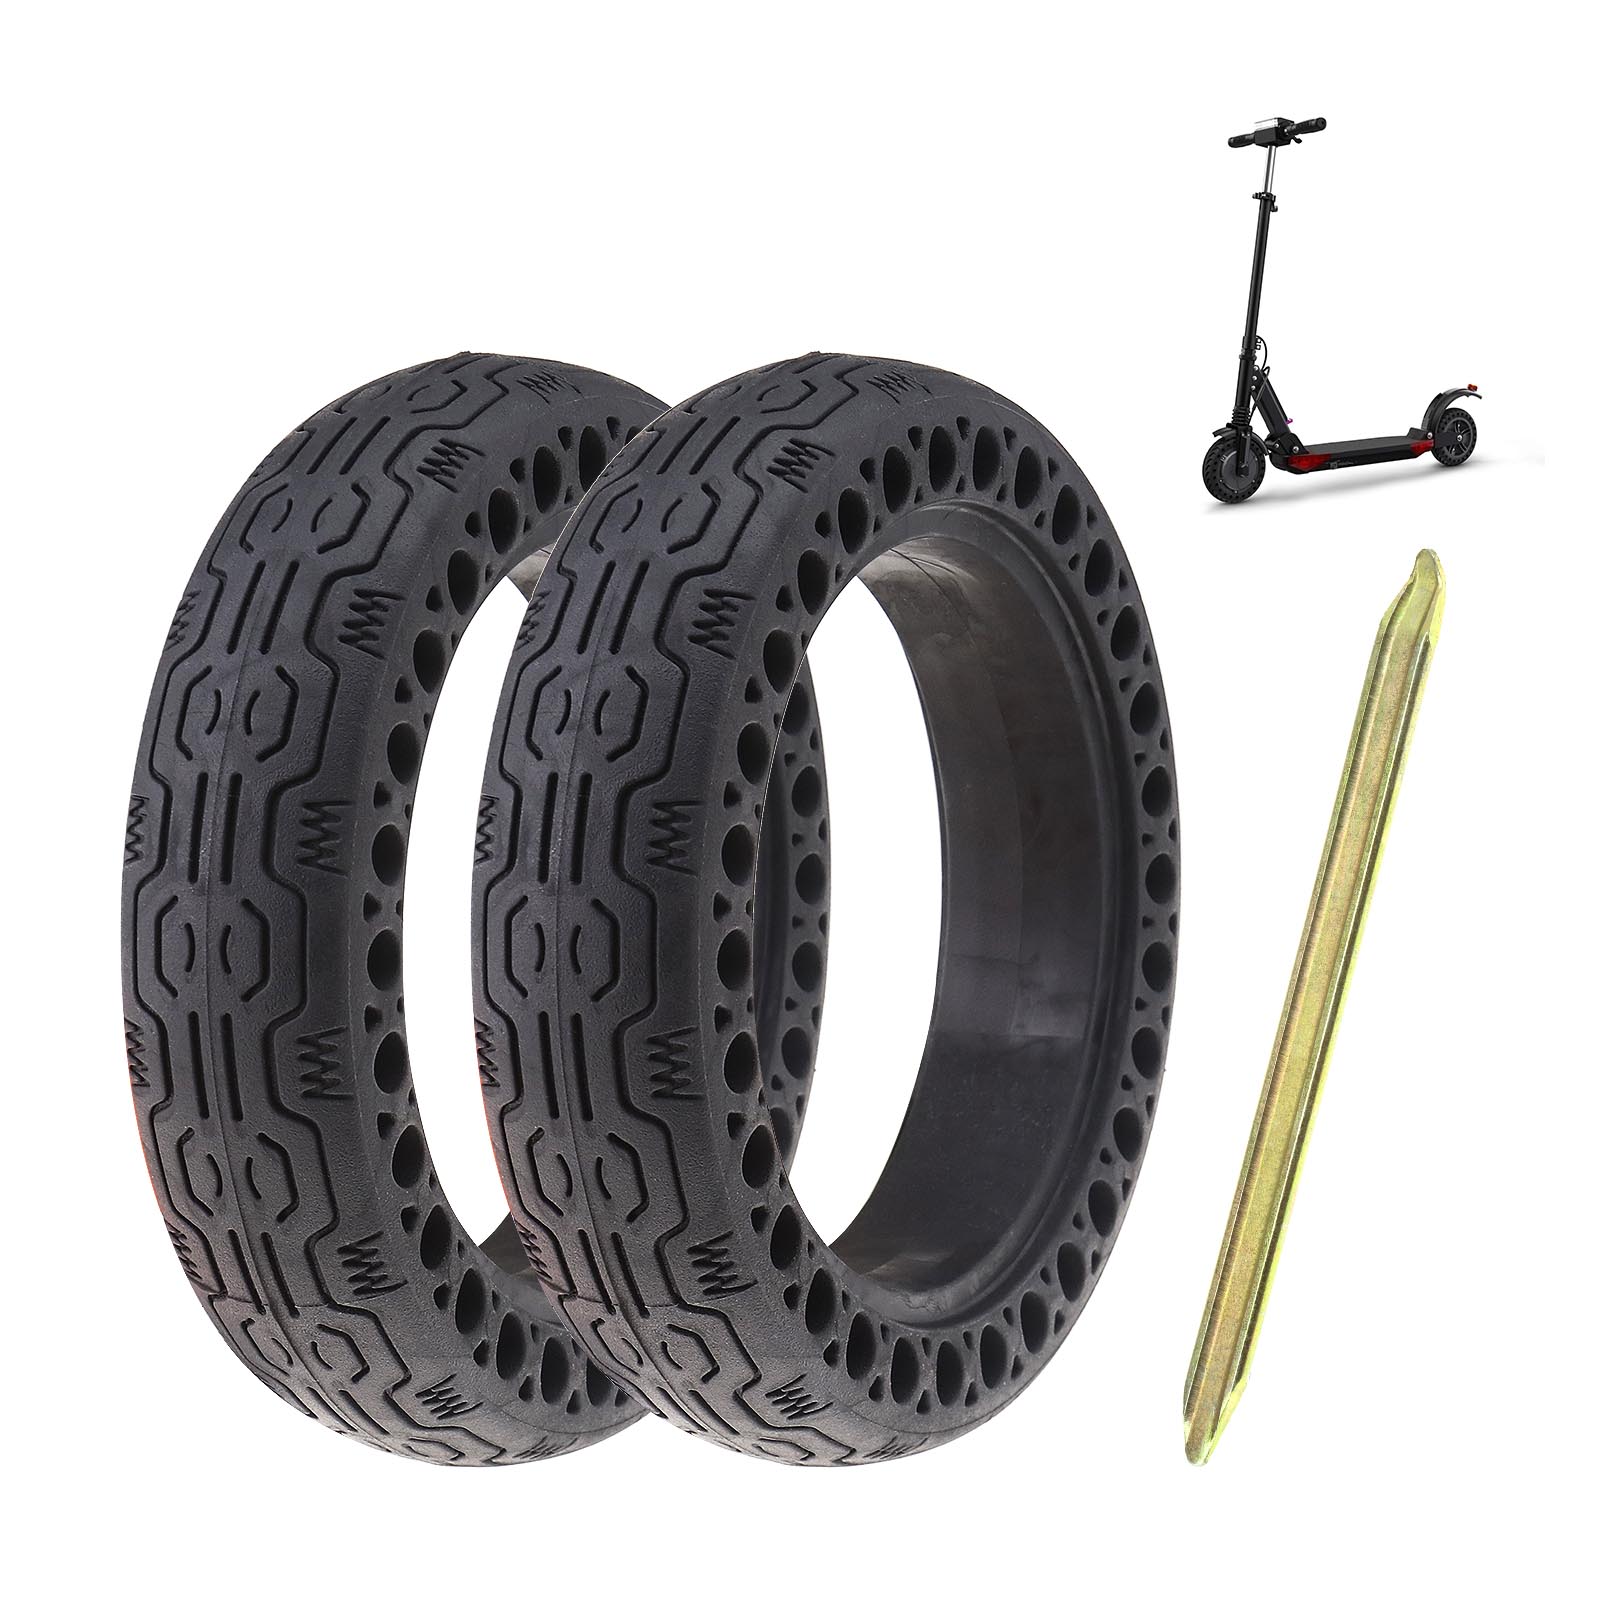 4 Ply 10 Inch Tyre 10x350-4 10x3.50-4 Tarmac Tread 4 Inch Wheel Electric Scooter 